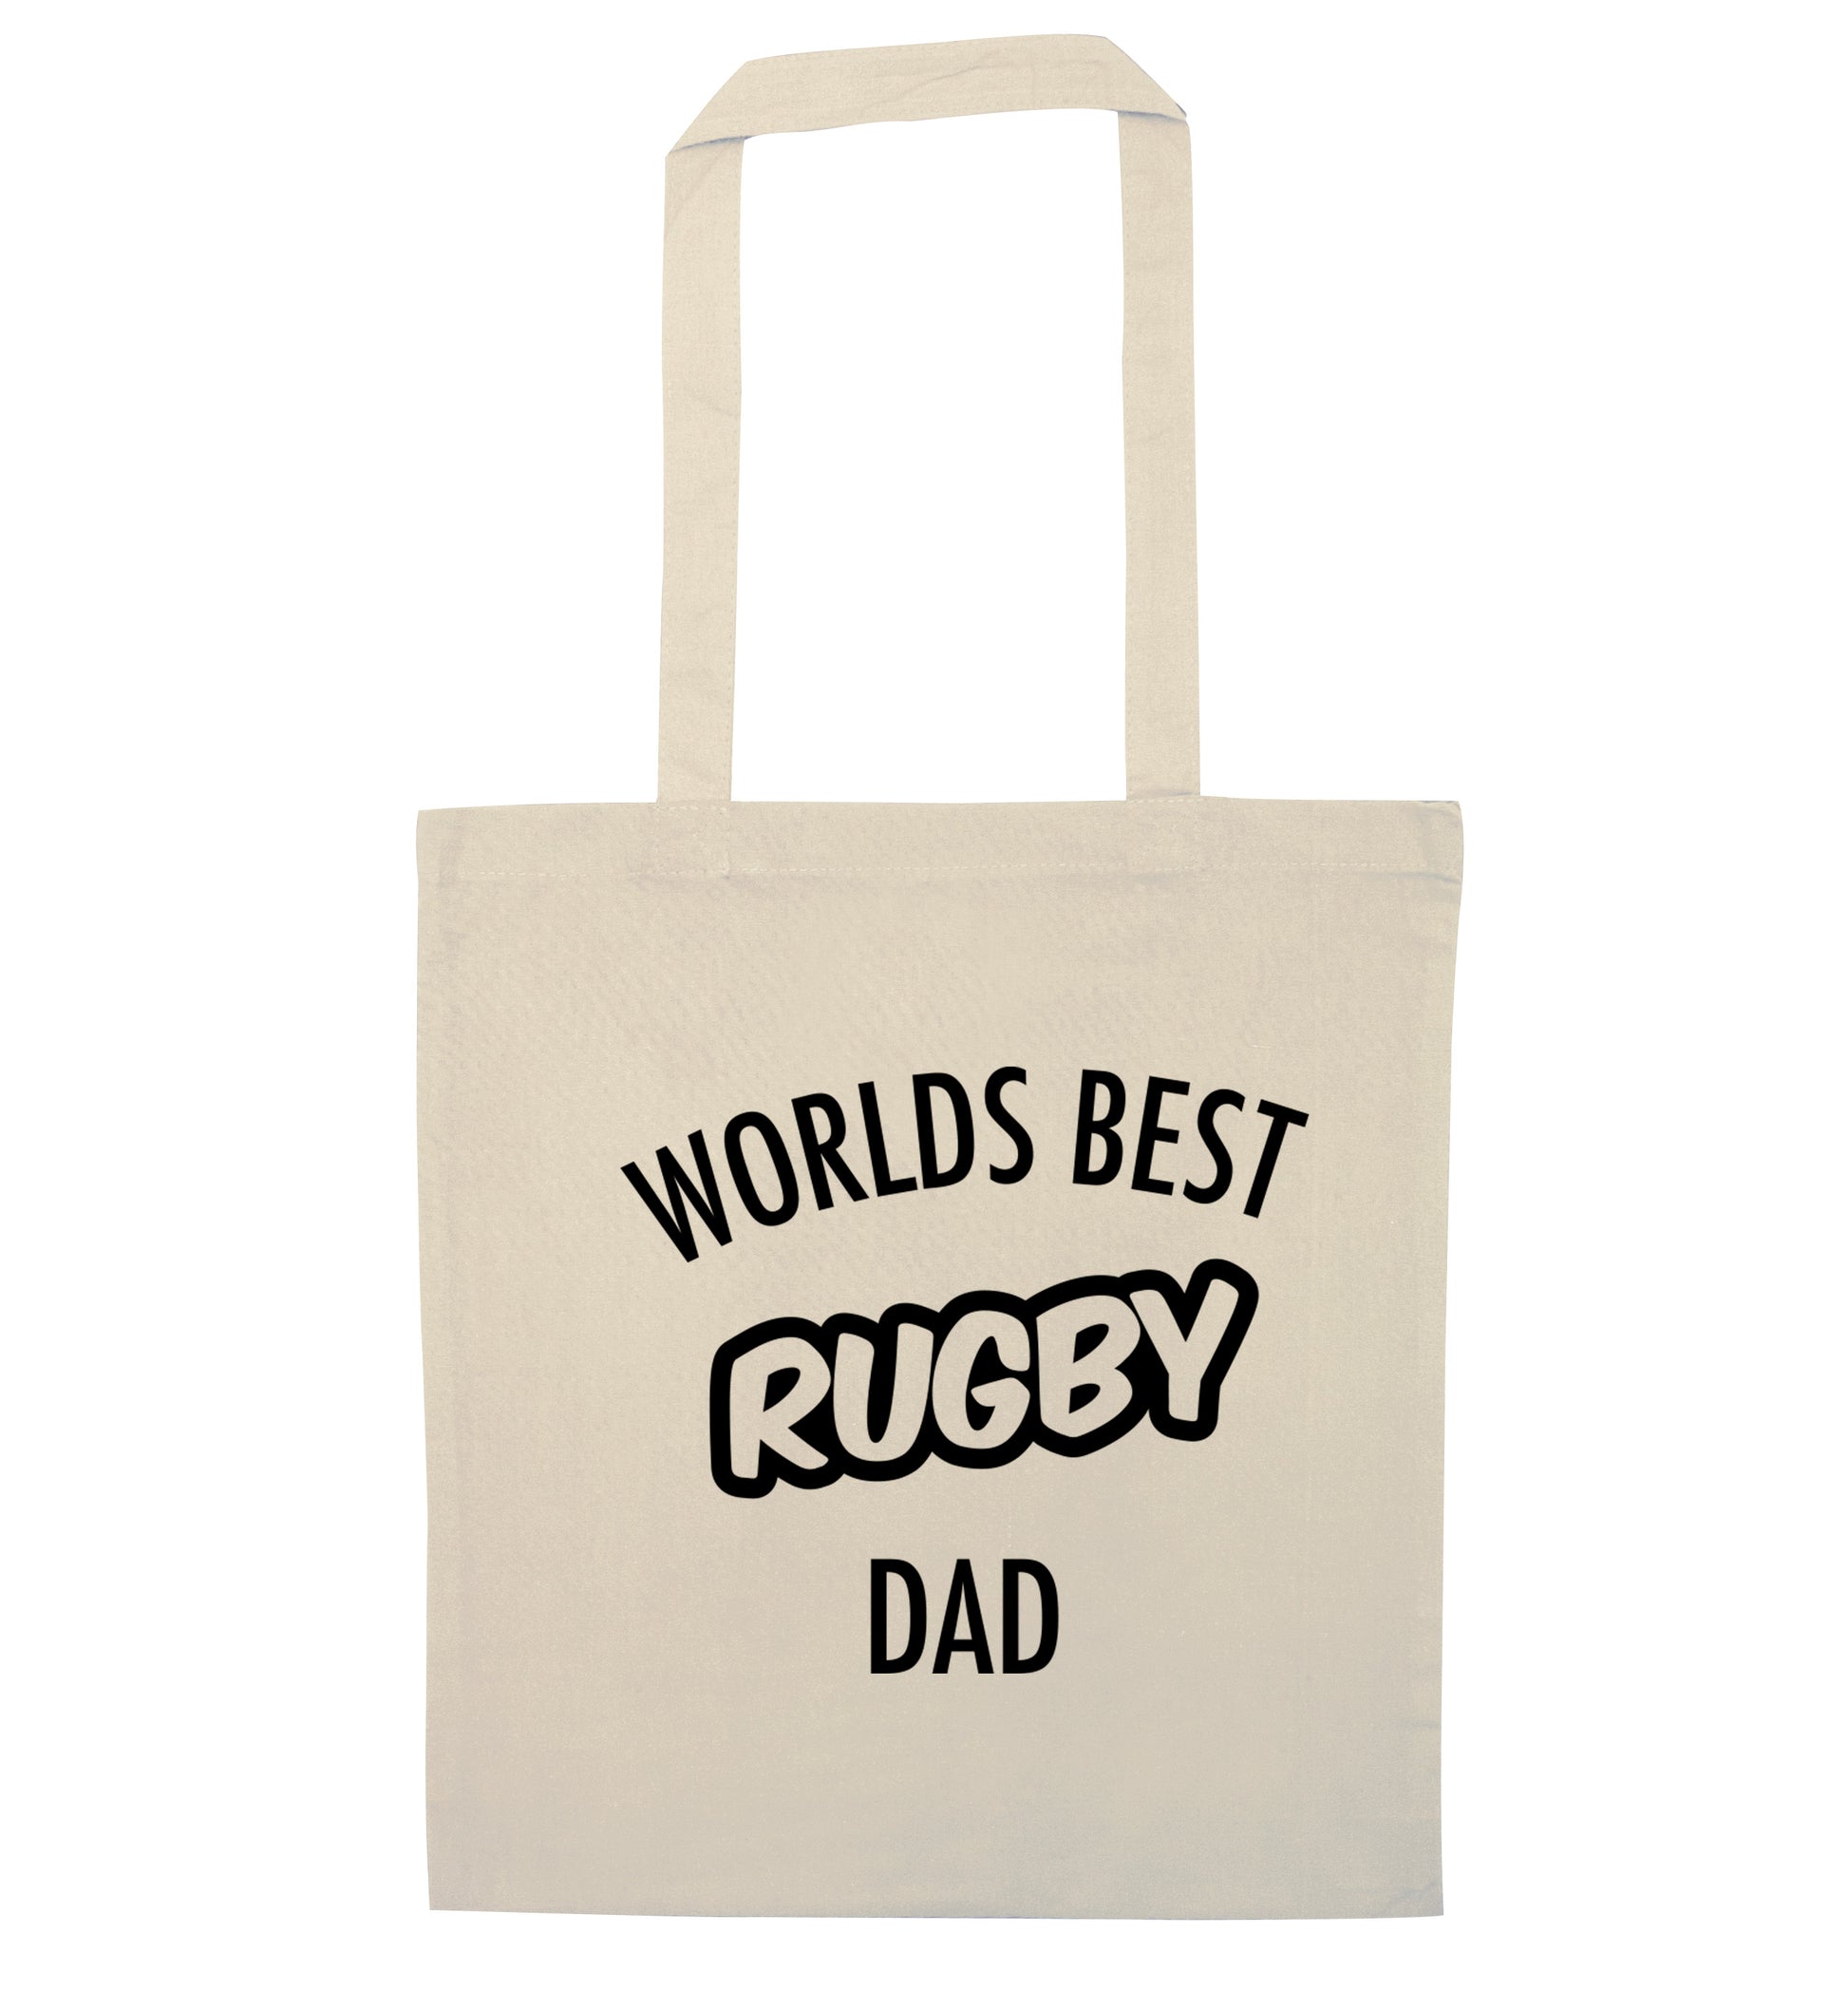 Worlds best rugby dad natural tote bag